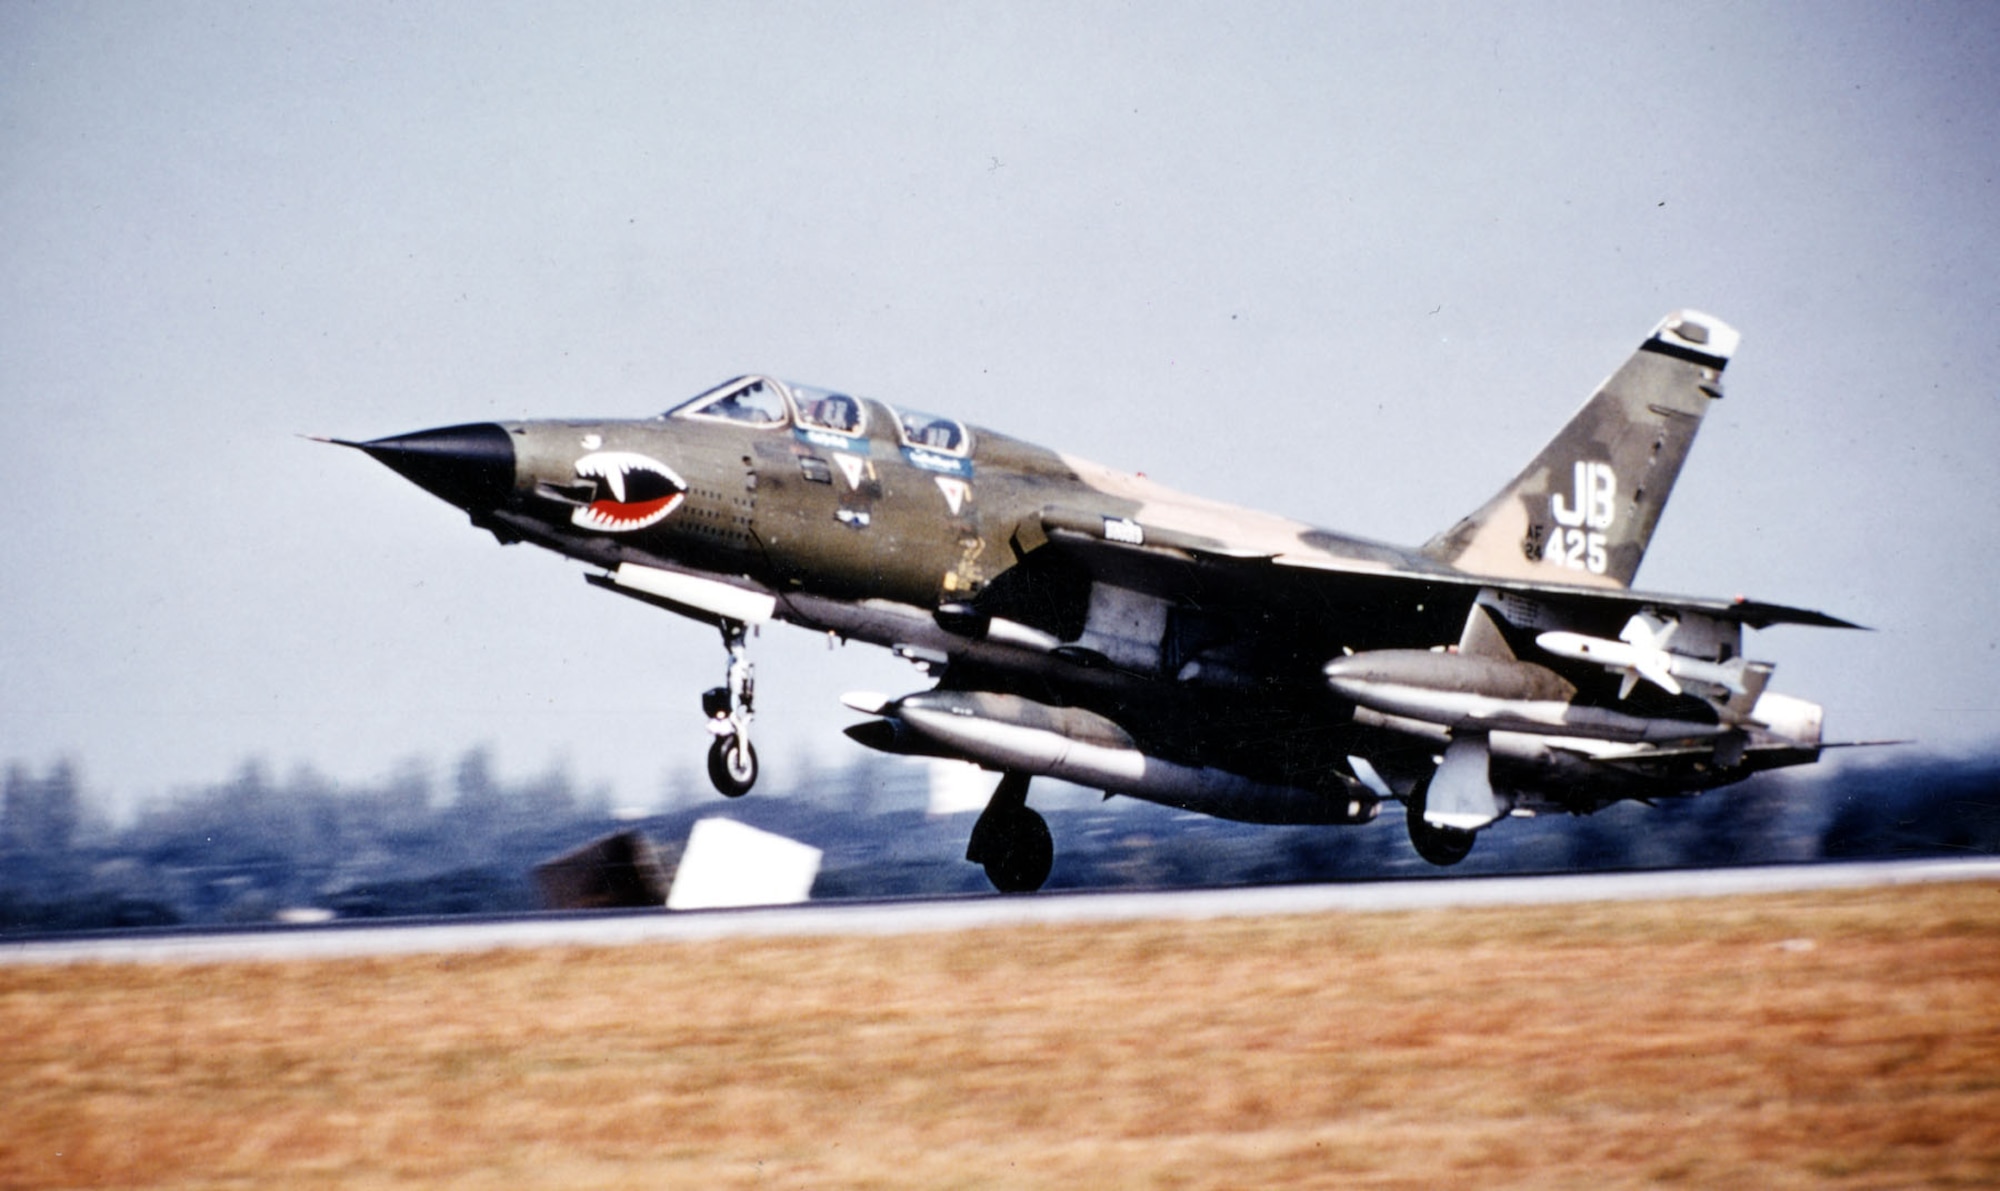 Dec. 29, 1972, the end of an era—Capts. Jim Boyd and Kim Pepperell landing after one of the last Wild Weasel missions of the Southeast Asia War. (U.S. Air Force photo)